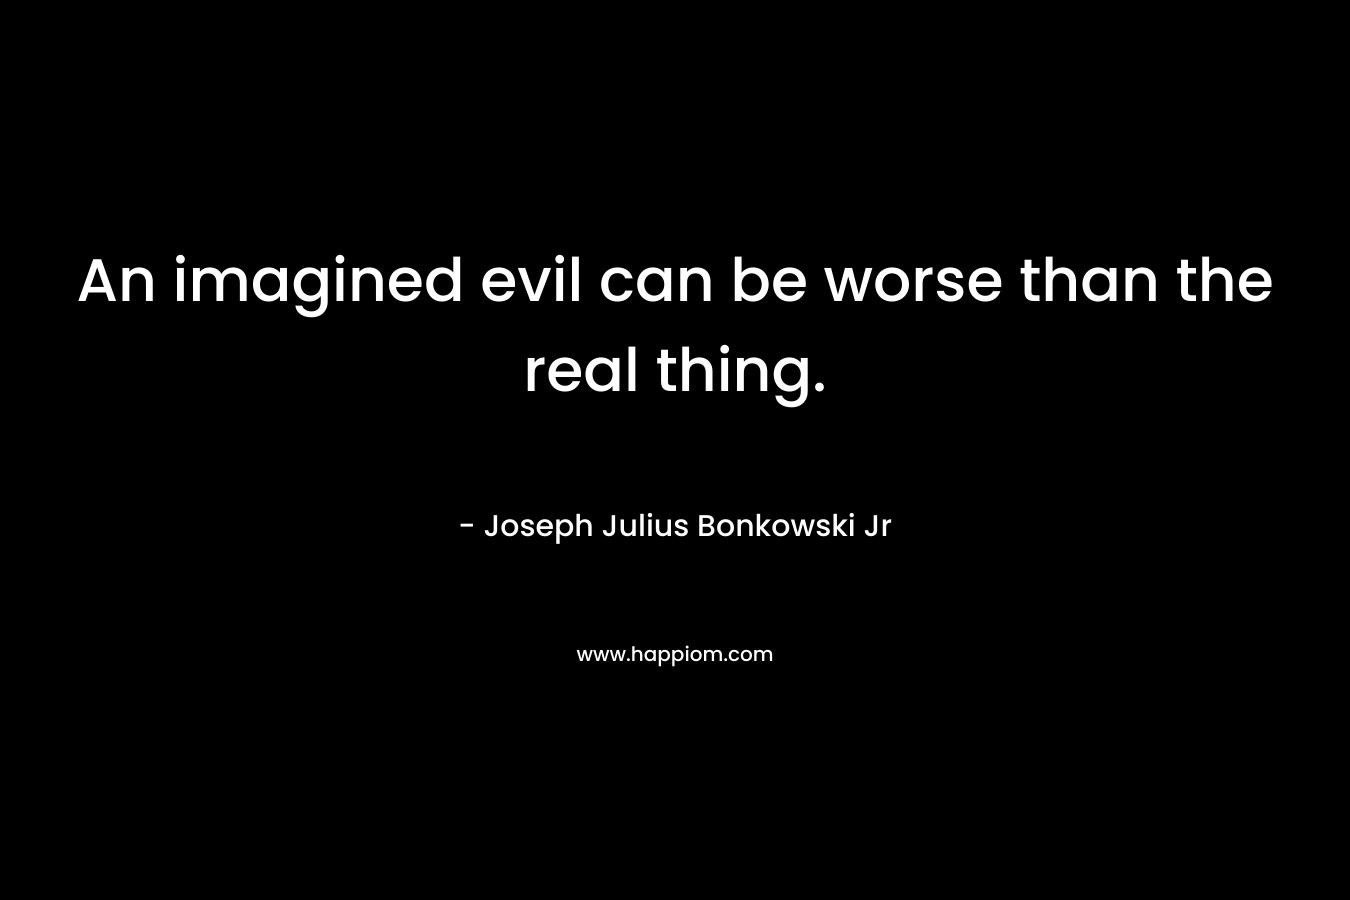 An imagined evil can be worse than the real thing. – Joseph Julius Bonkowski Jr